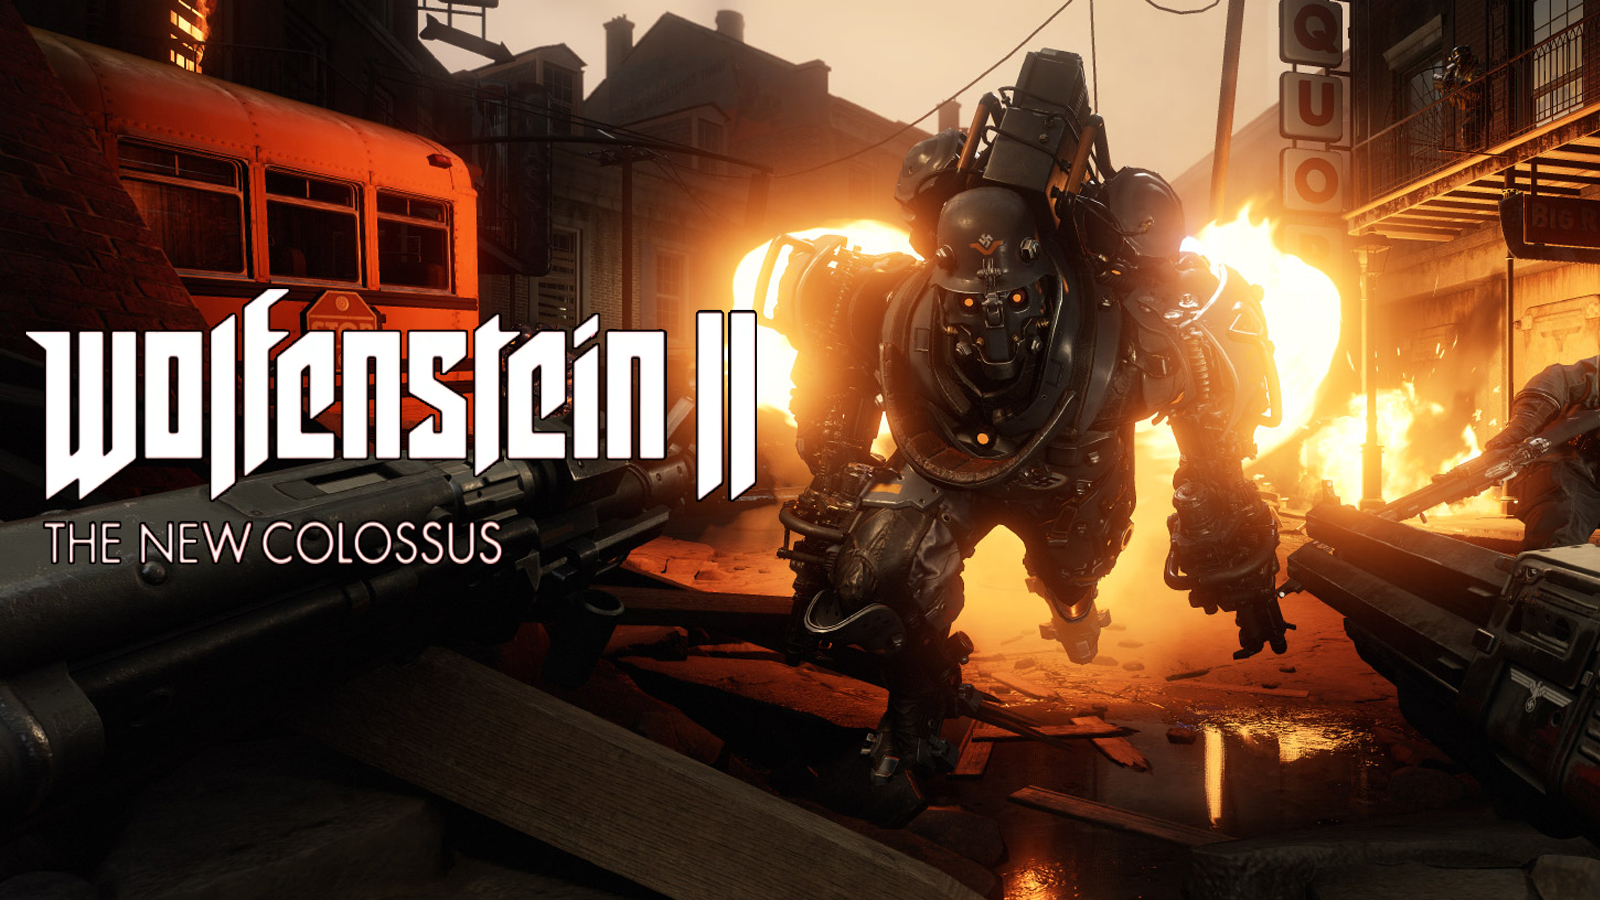 Wolfenstein II 2: The New Colossus Crack + CD Key PC Game Download